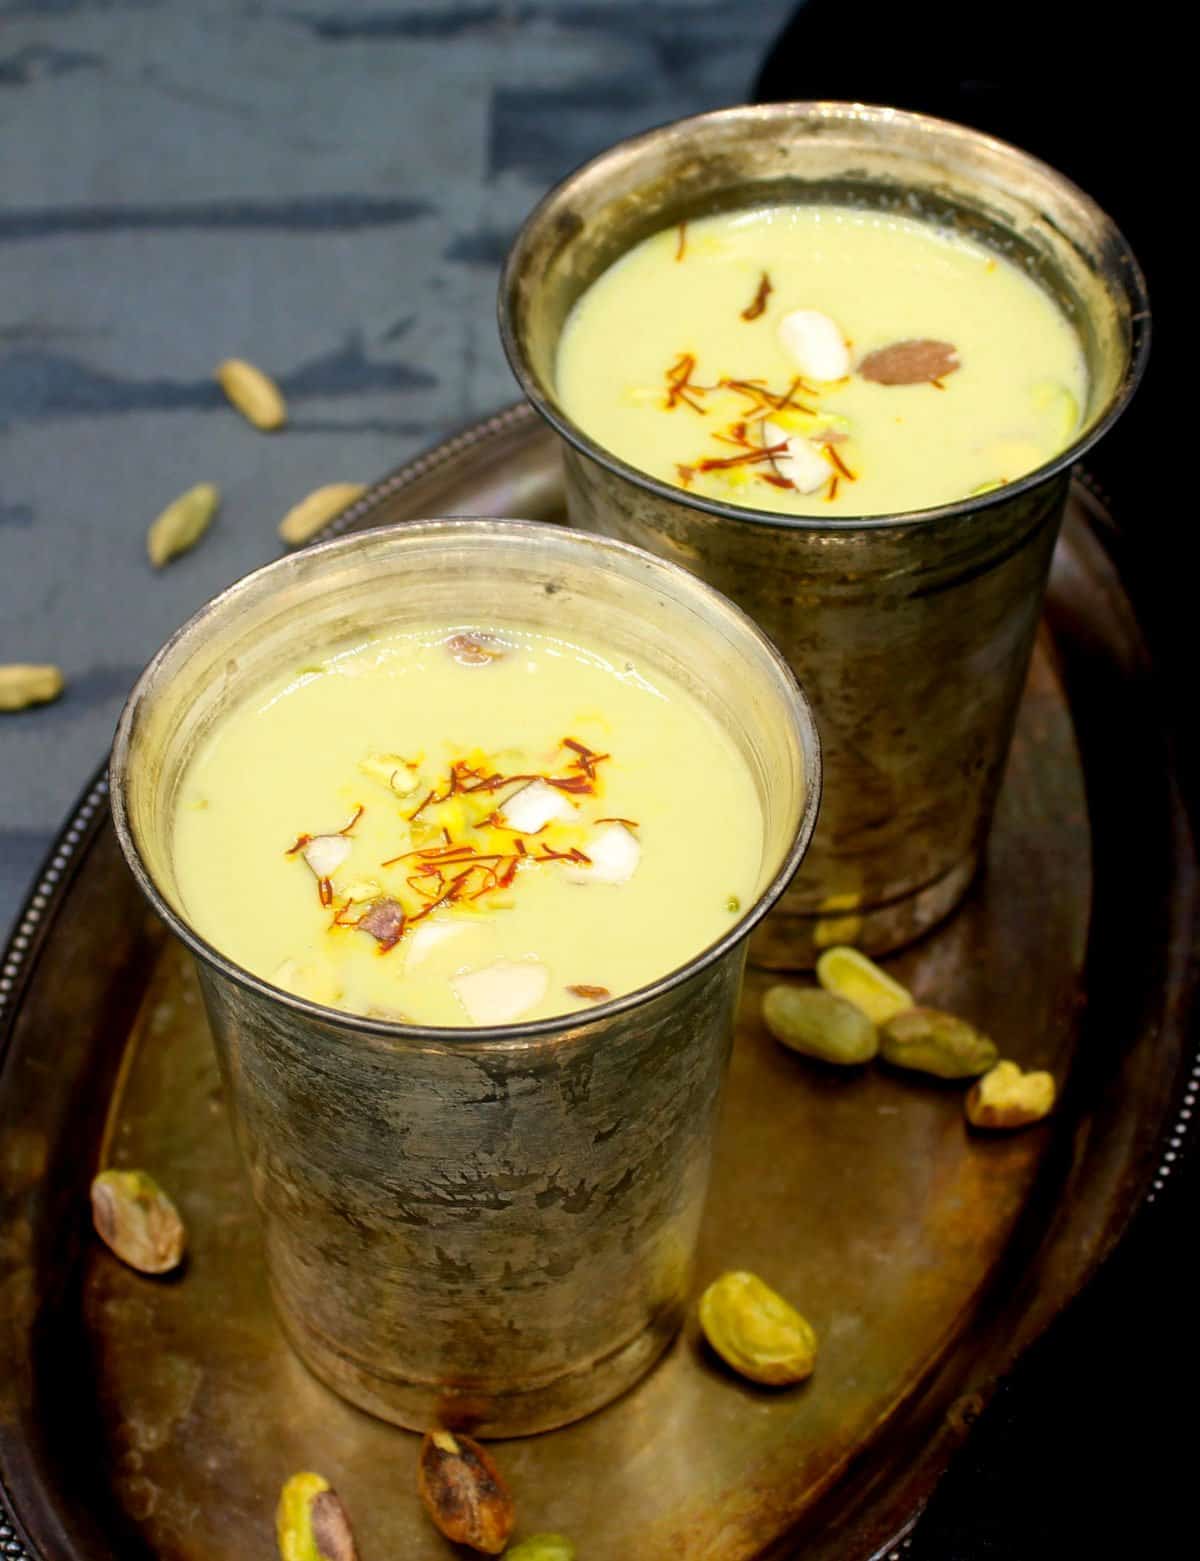 Front shot of two silver glasses filled to the brim with vegan thandai with saffron and nuts garnish and nuts and cardamom pods scattered around.